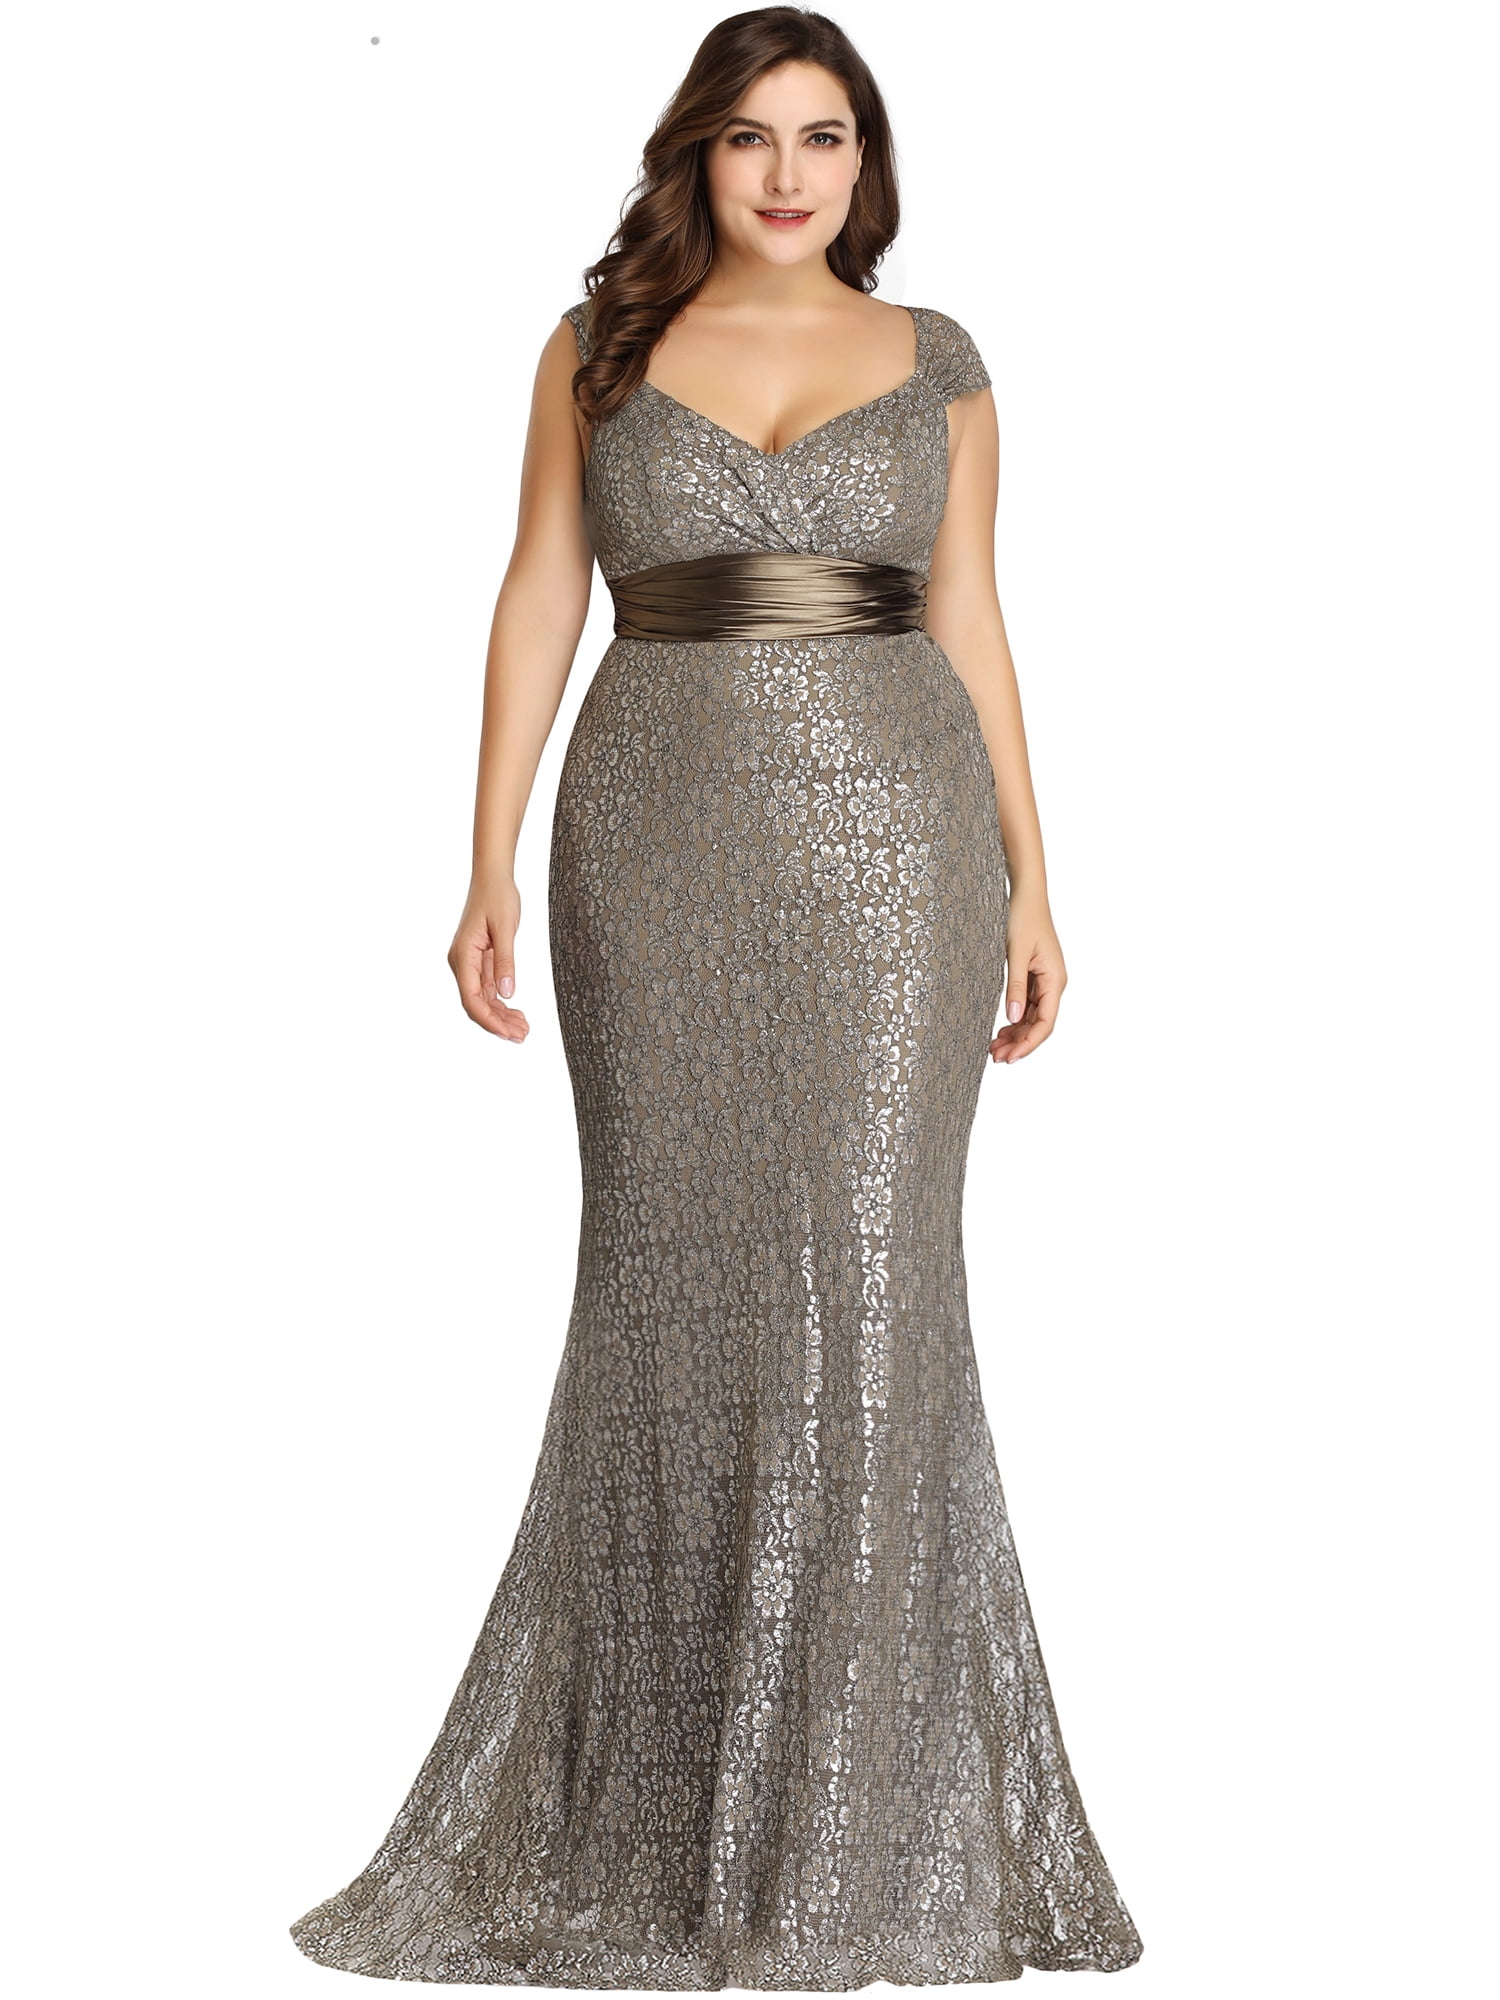 Lace Long Formal Evening Party Dresses ...